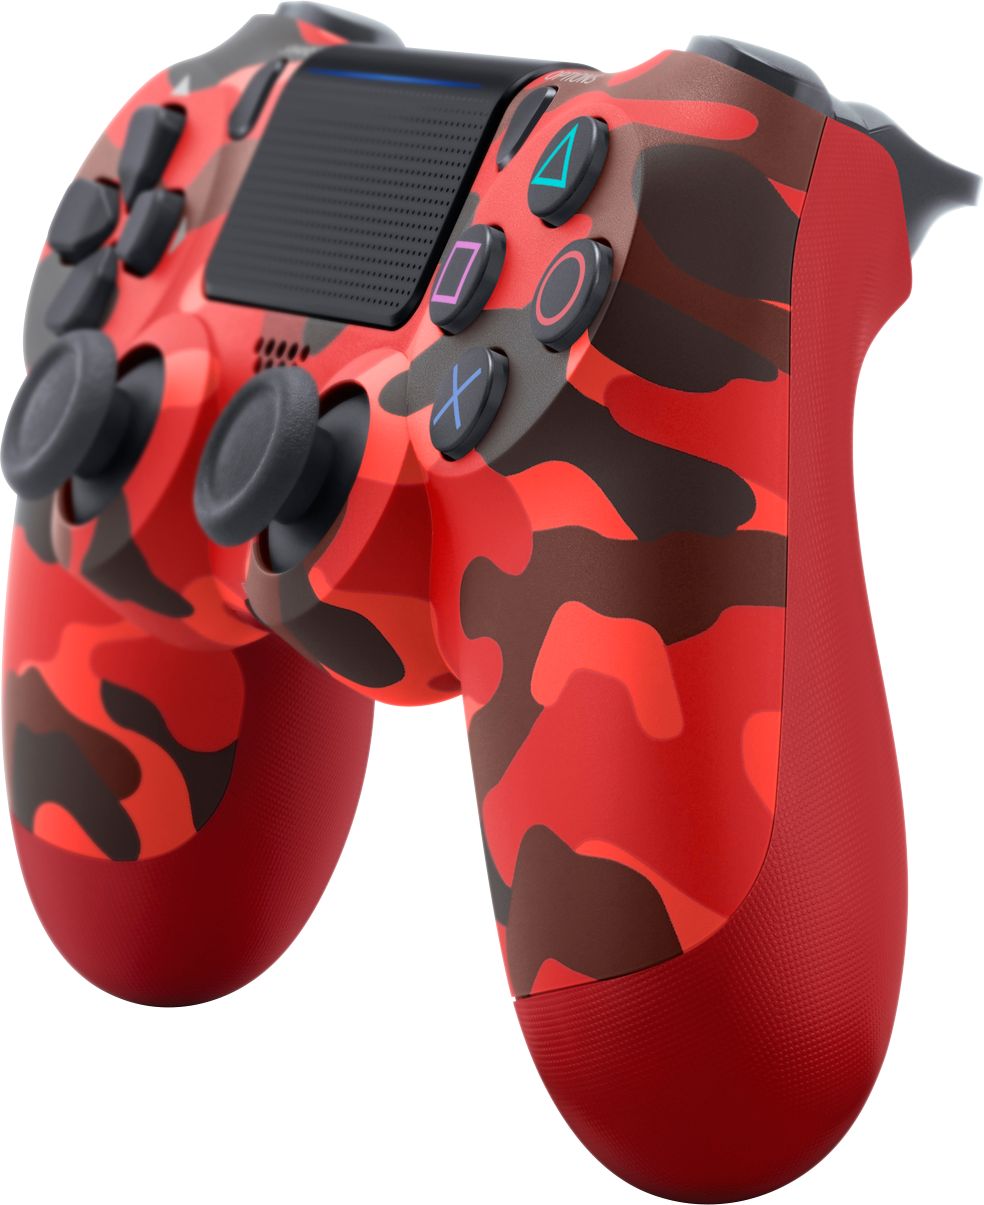 chauffør Calibre Bevise Best Buy: DualShock 4 Wireless Controller for Sony PlayStation 4 Red  Camouflage 3004379